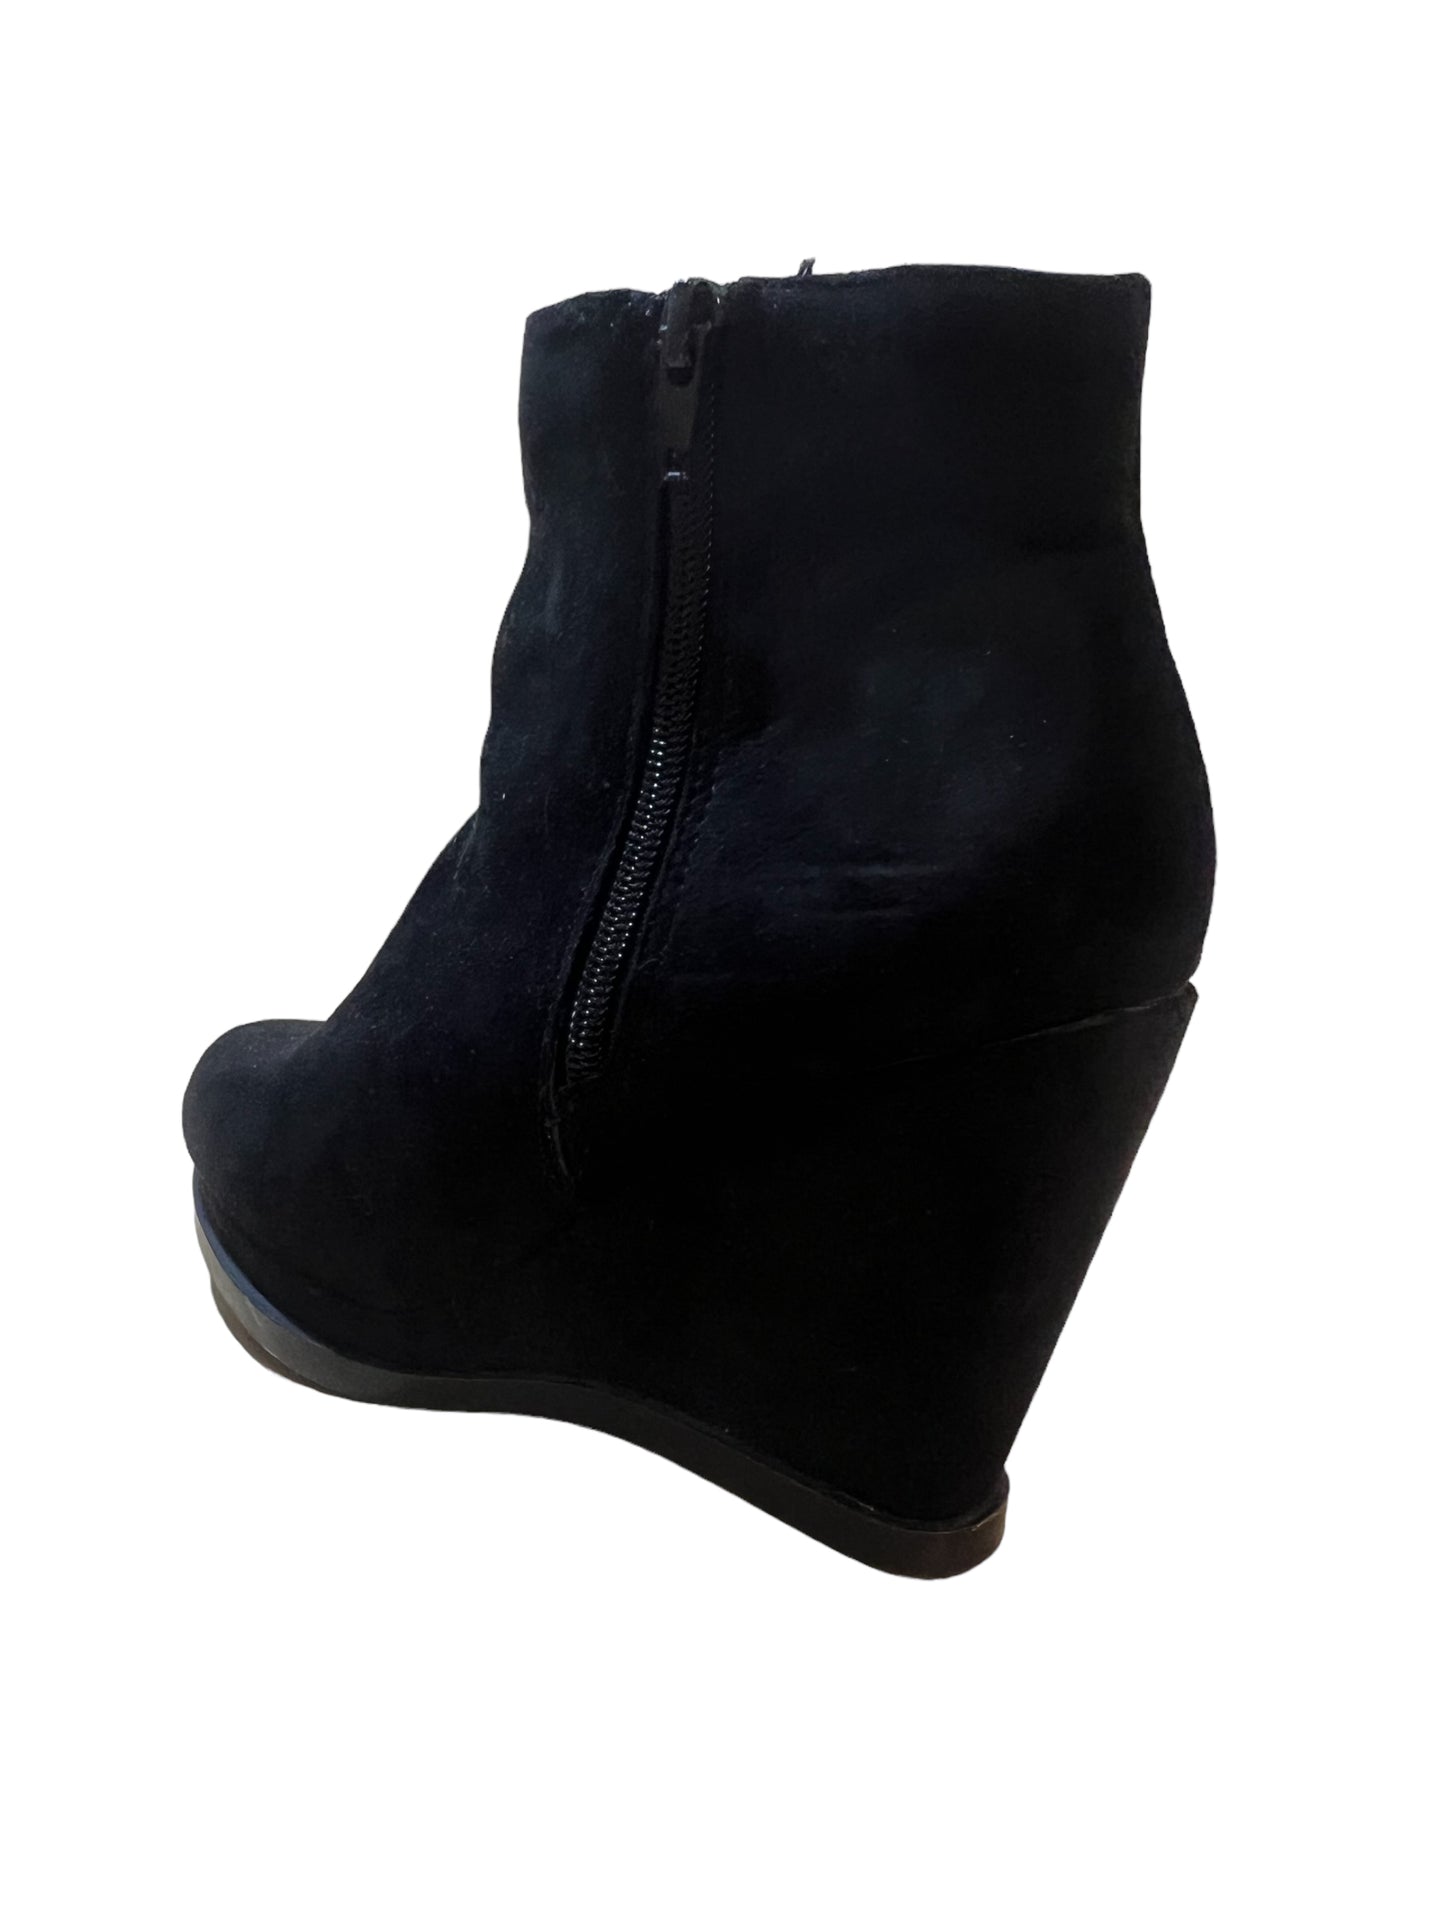 Forever 21 Booties